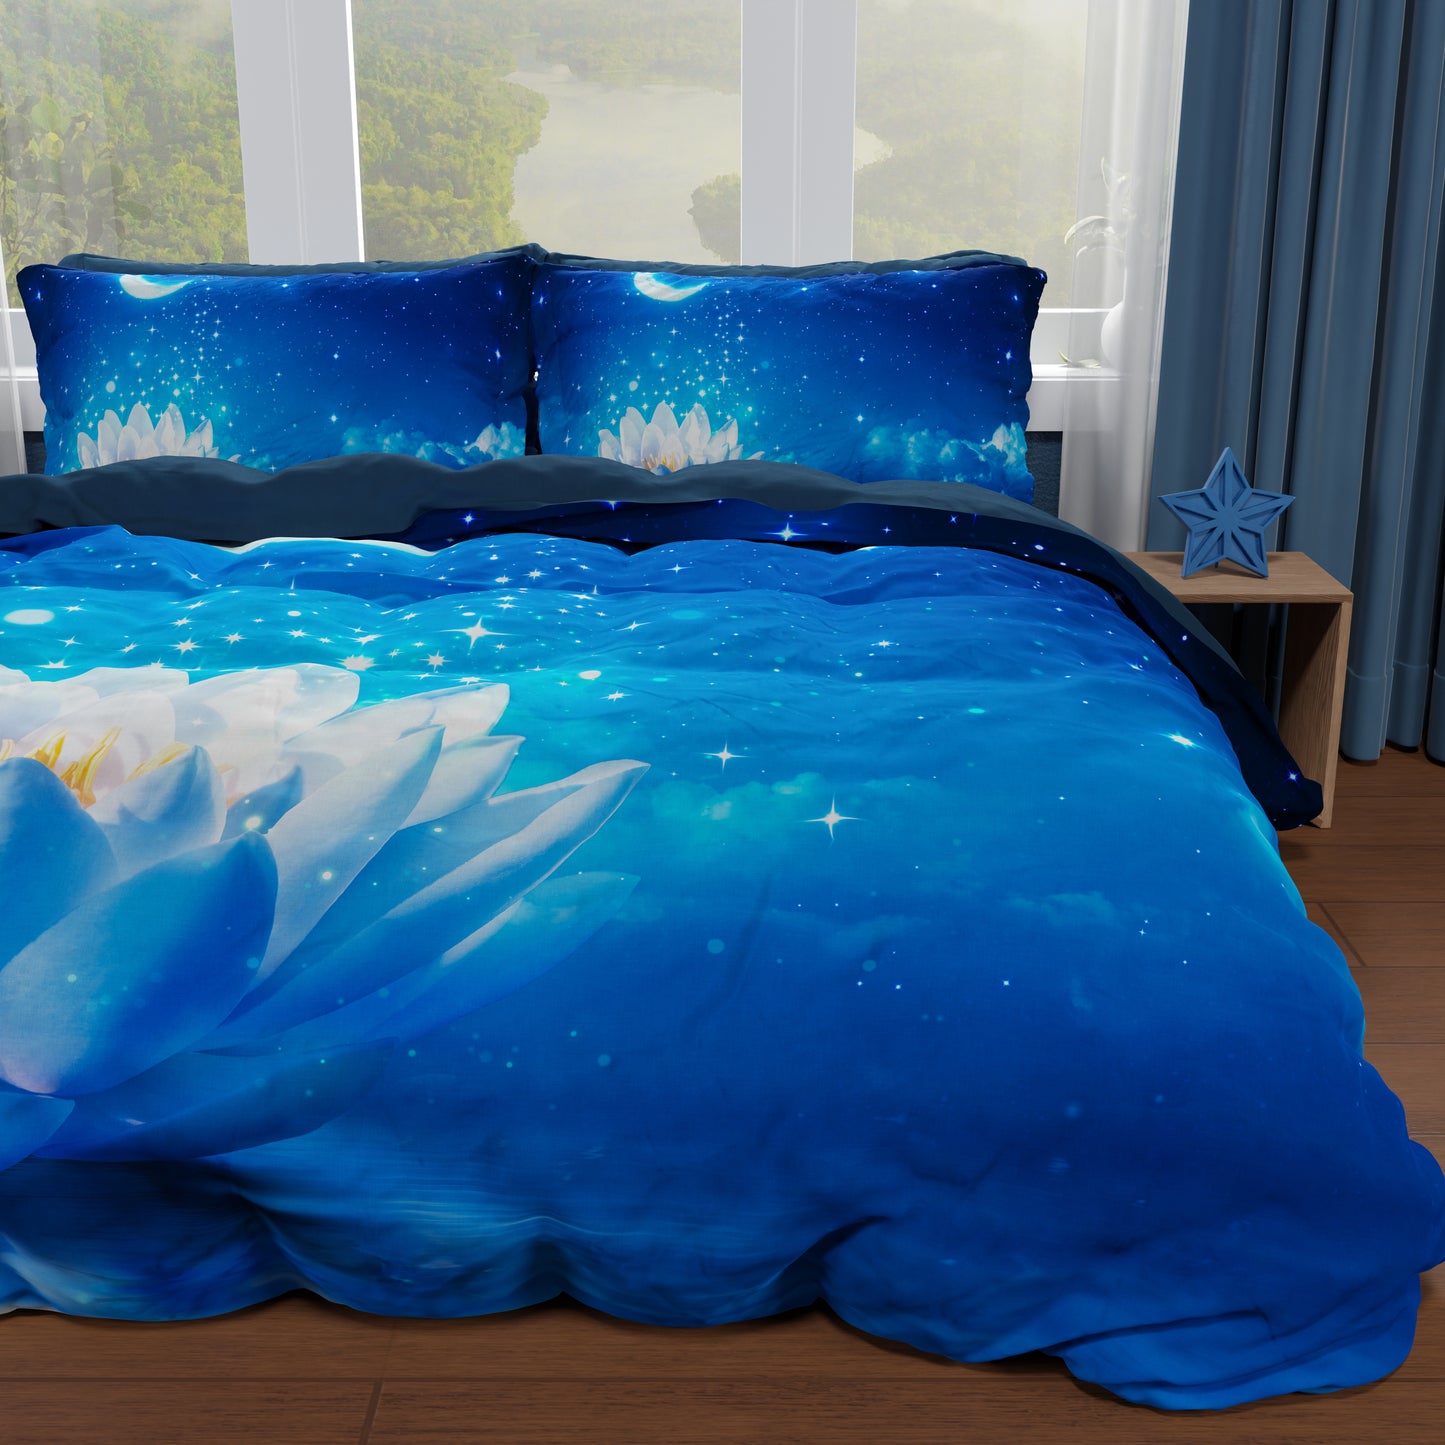 Double, Single, Queen Size Duvet Cover, Starry Night